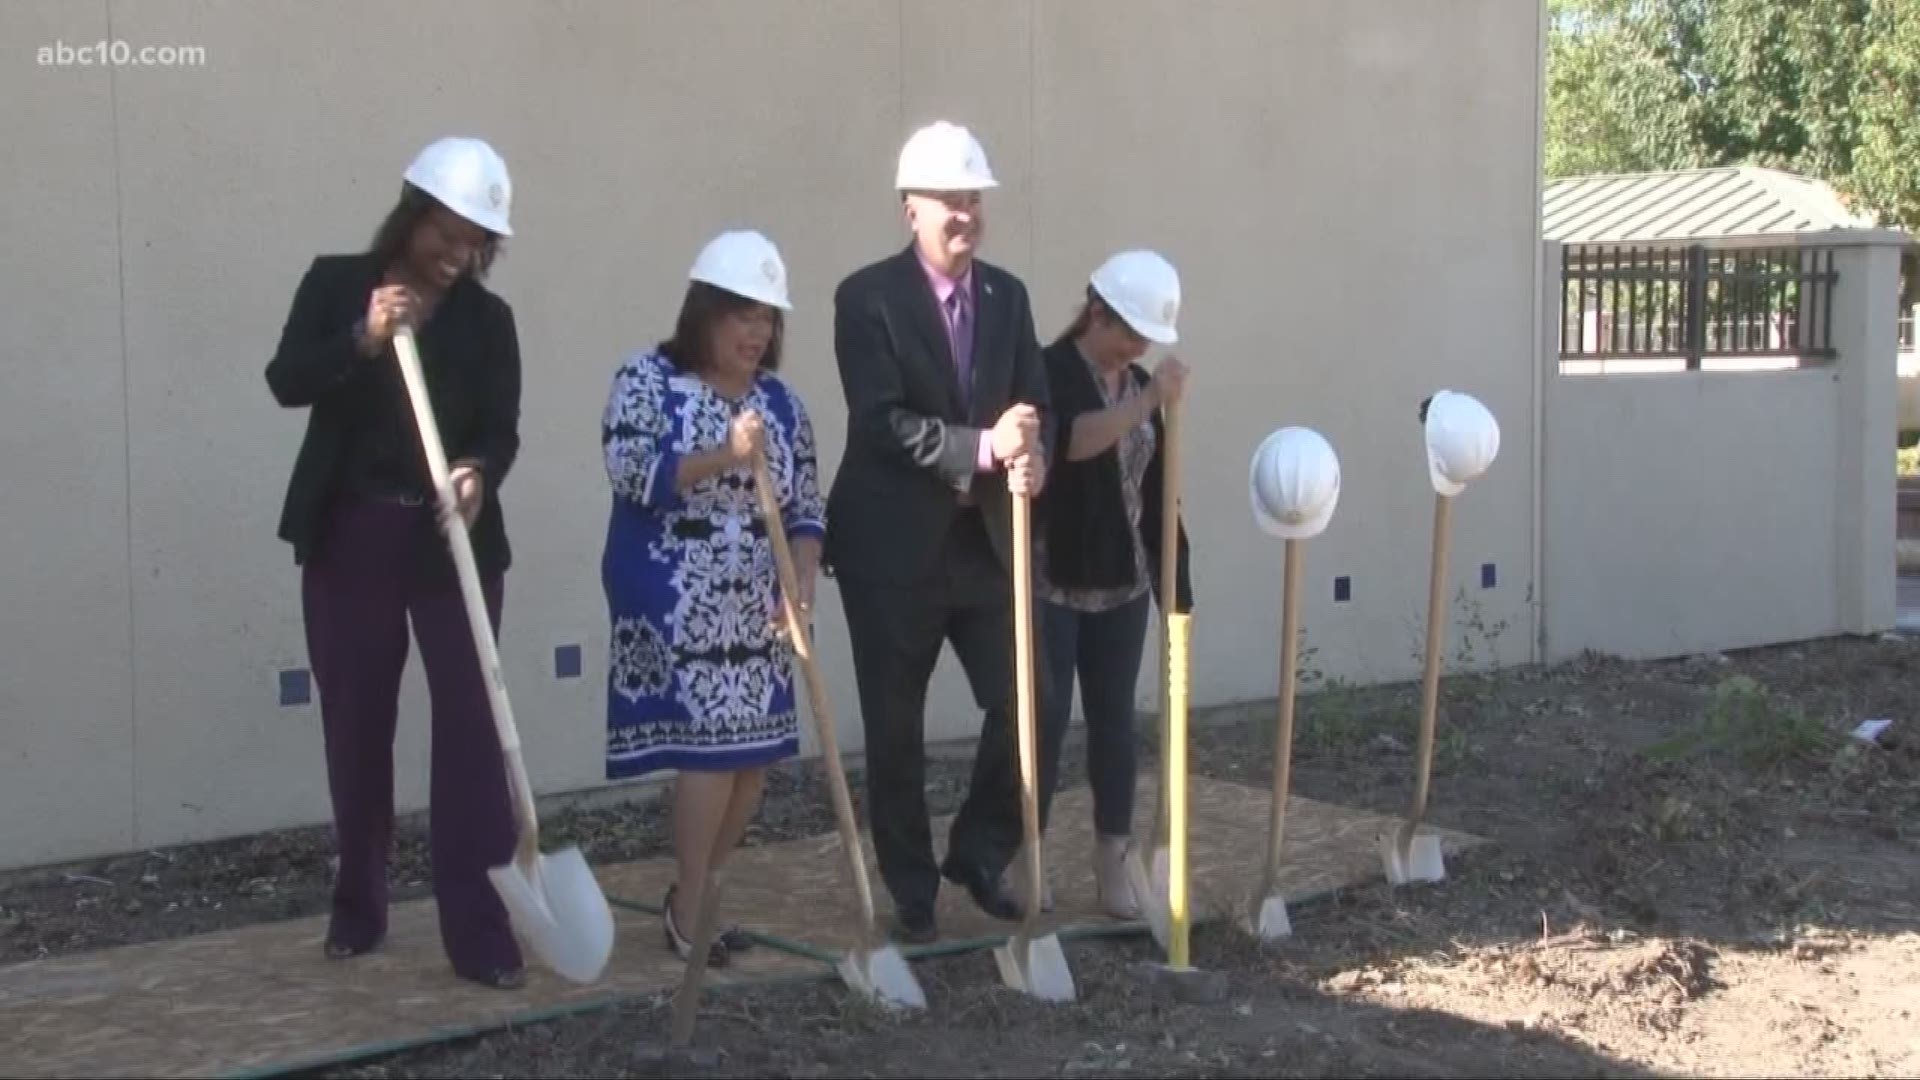 The City of Tracy broke ground on the expansion of their one and only senior center, Tuesday afternoon.